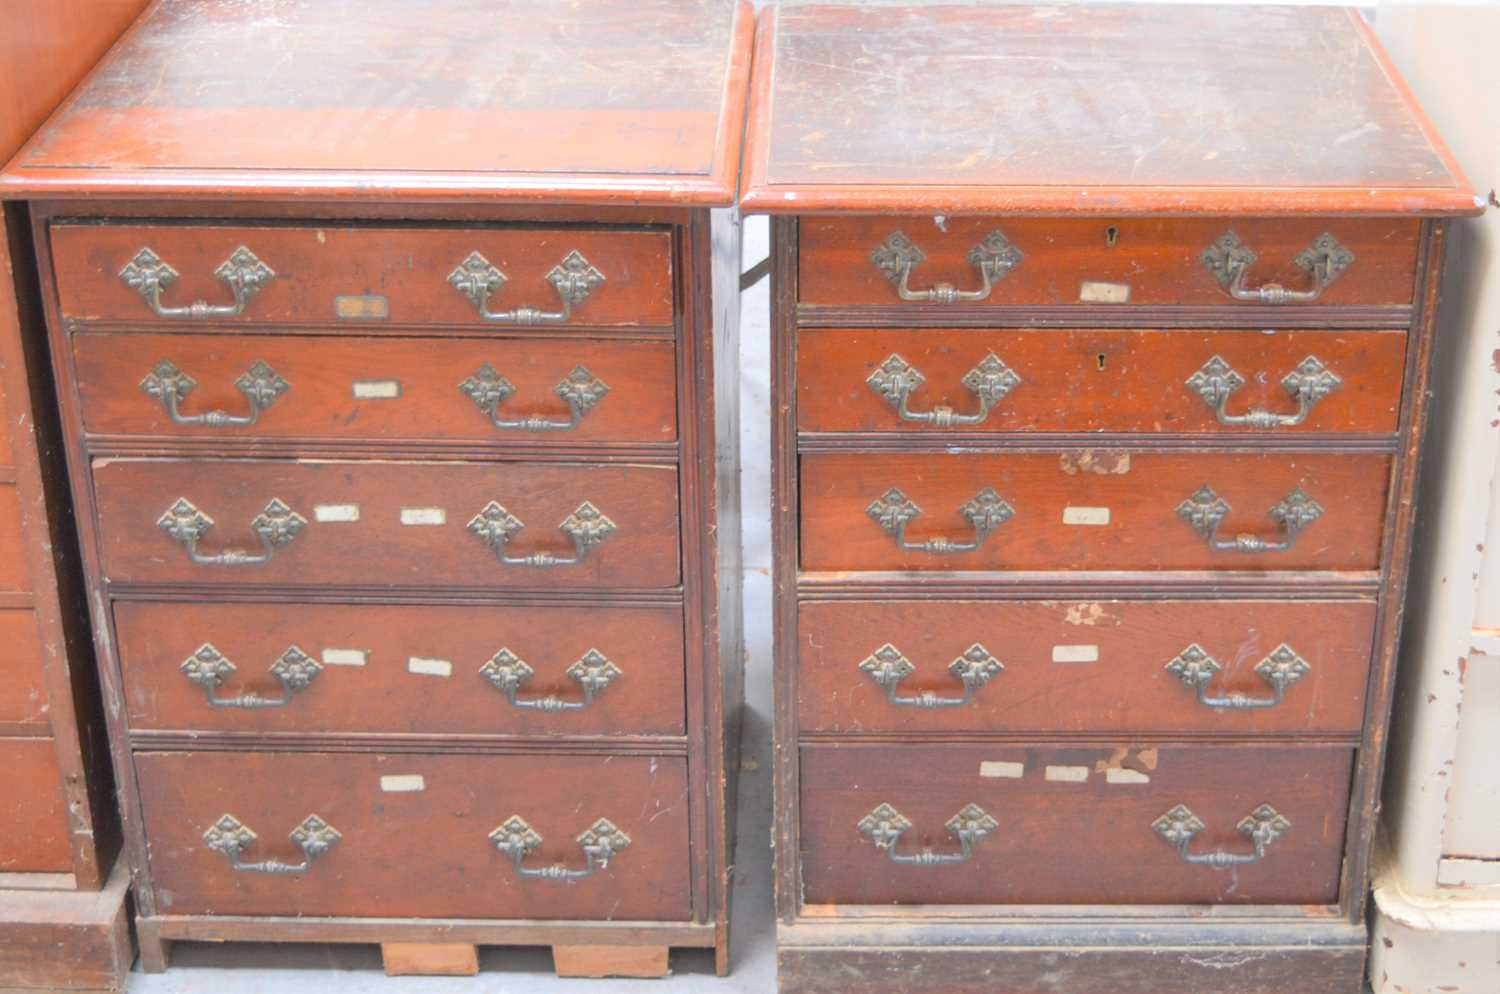 A pair of 19th century oak sets of drawers, six deep graduated drawers having decorative handles and